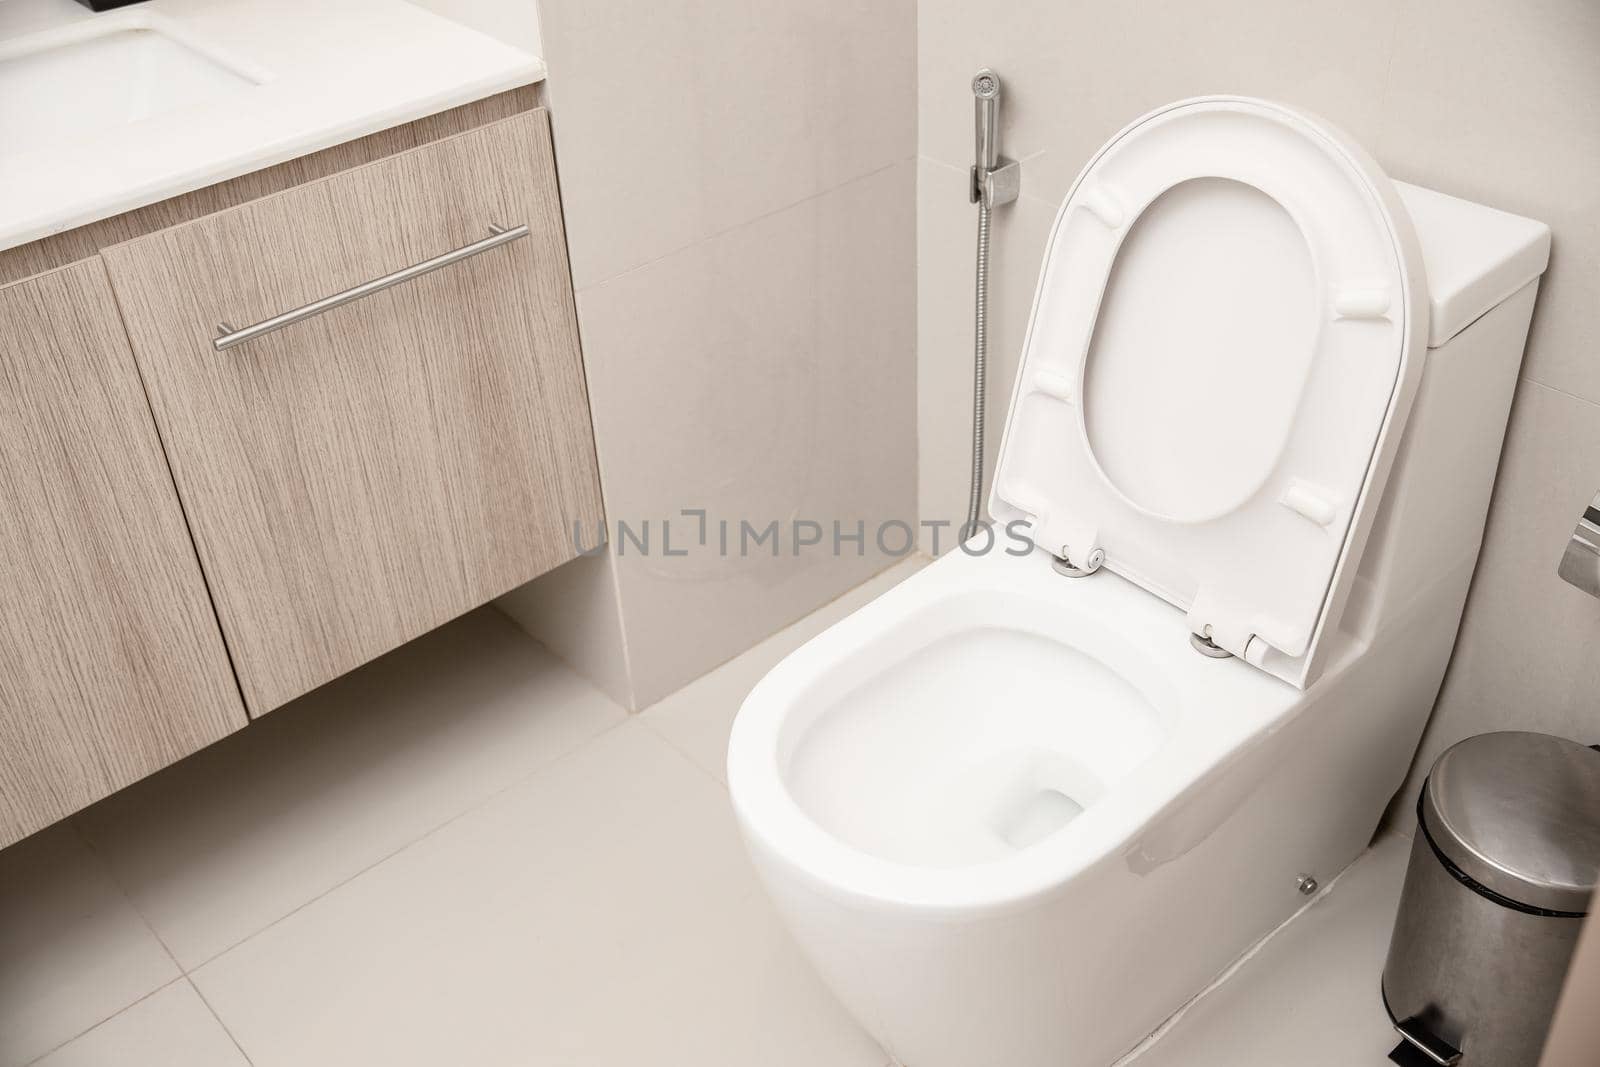 Clean Toilet bowl in hotel bathroom interior decoration by qualitystocks